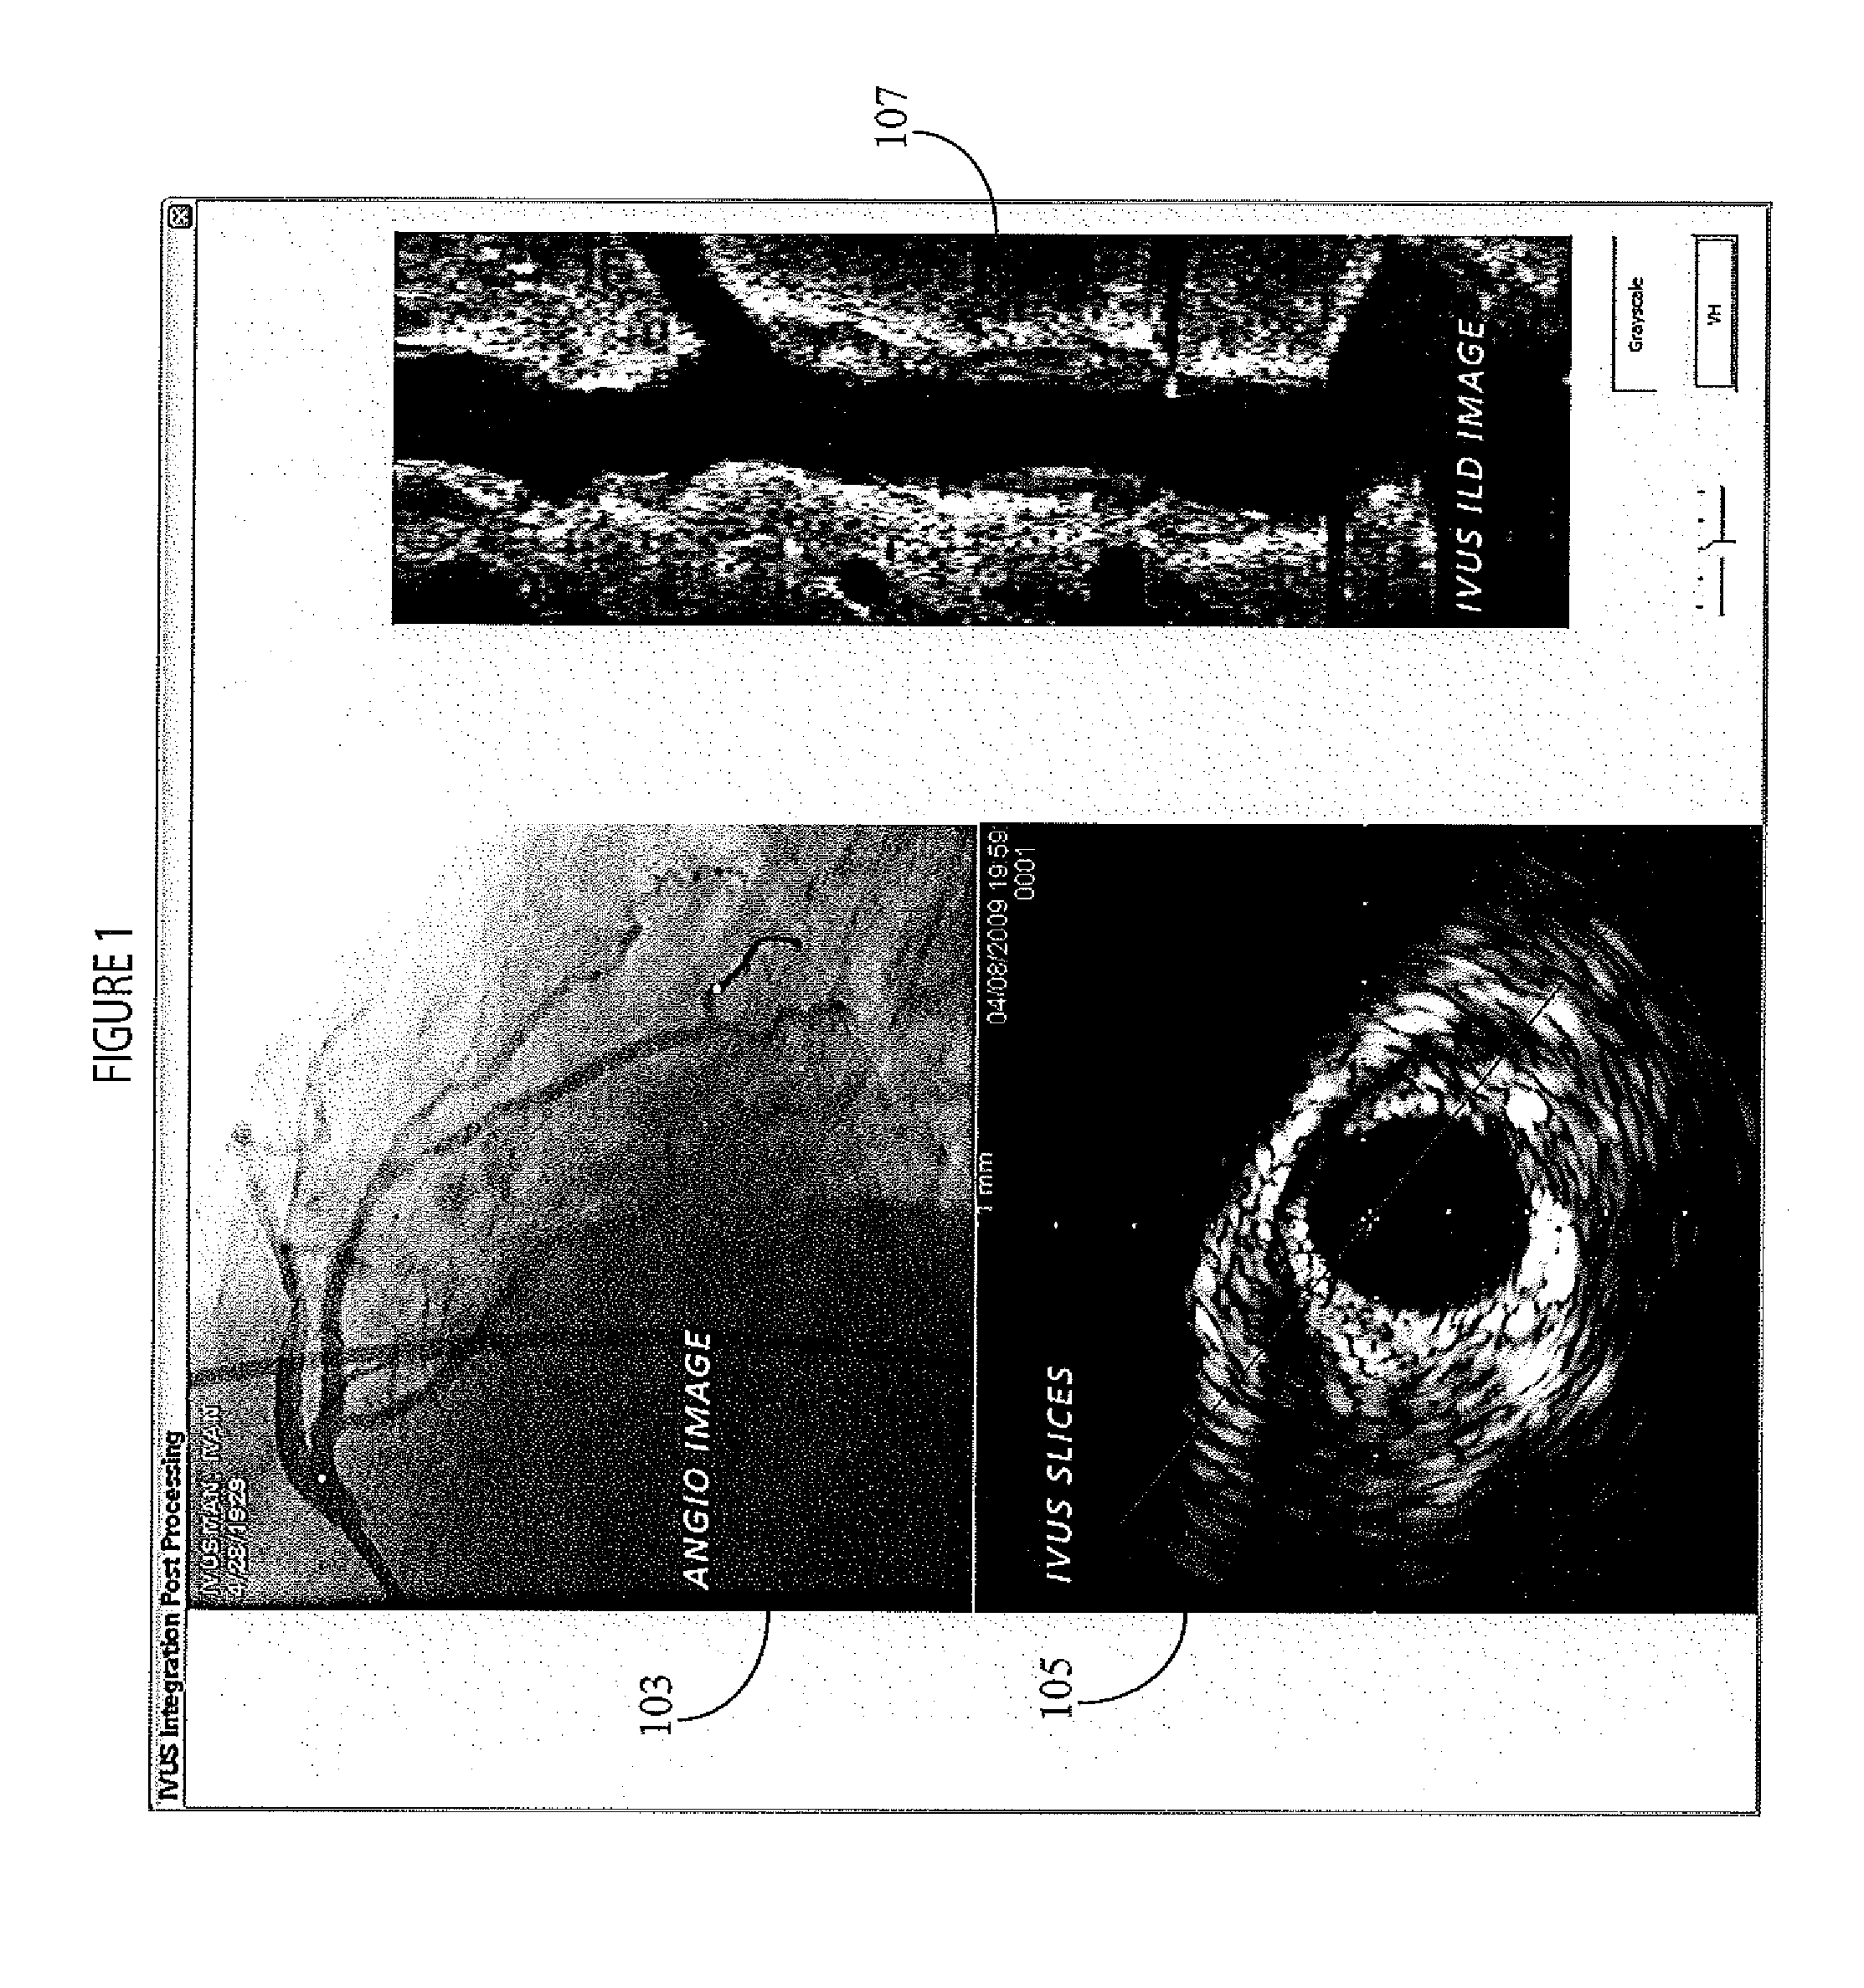 System for Processing Angiography and Ultrasound Image Data